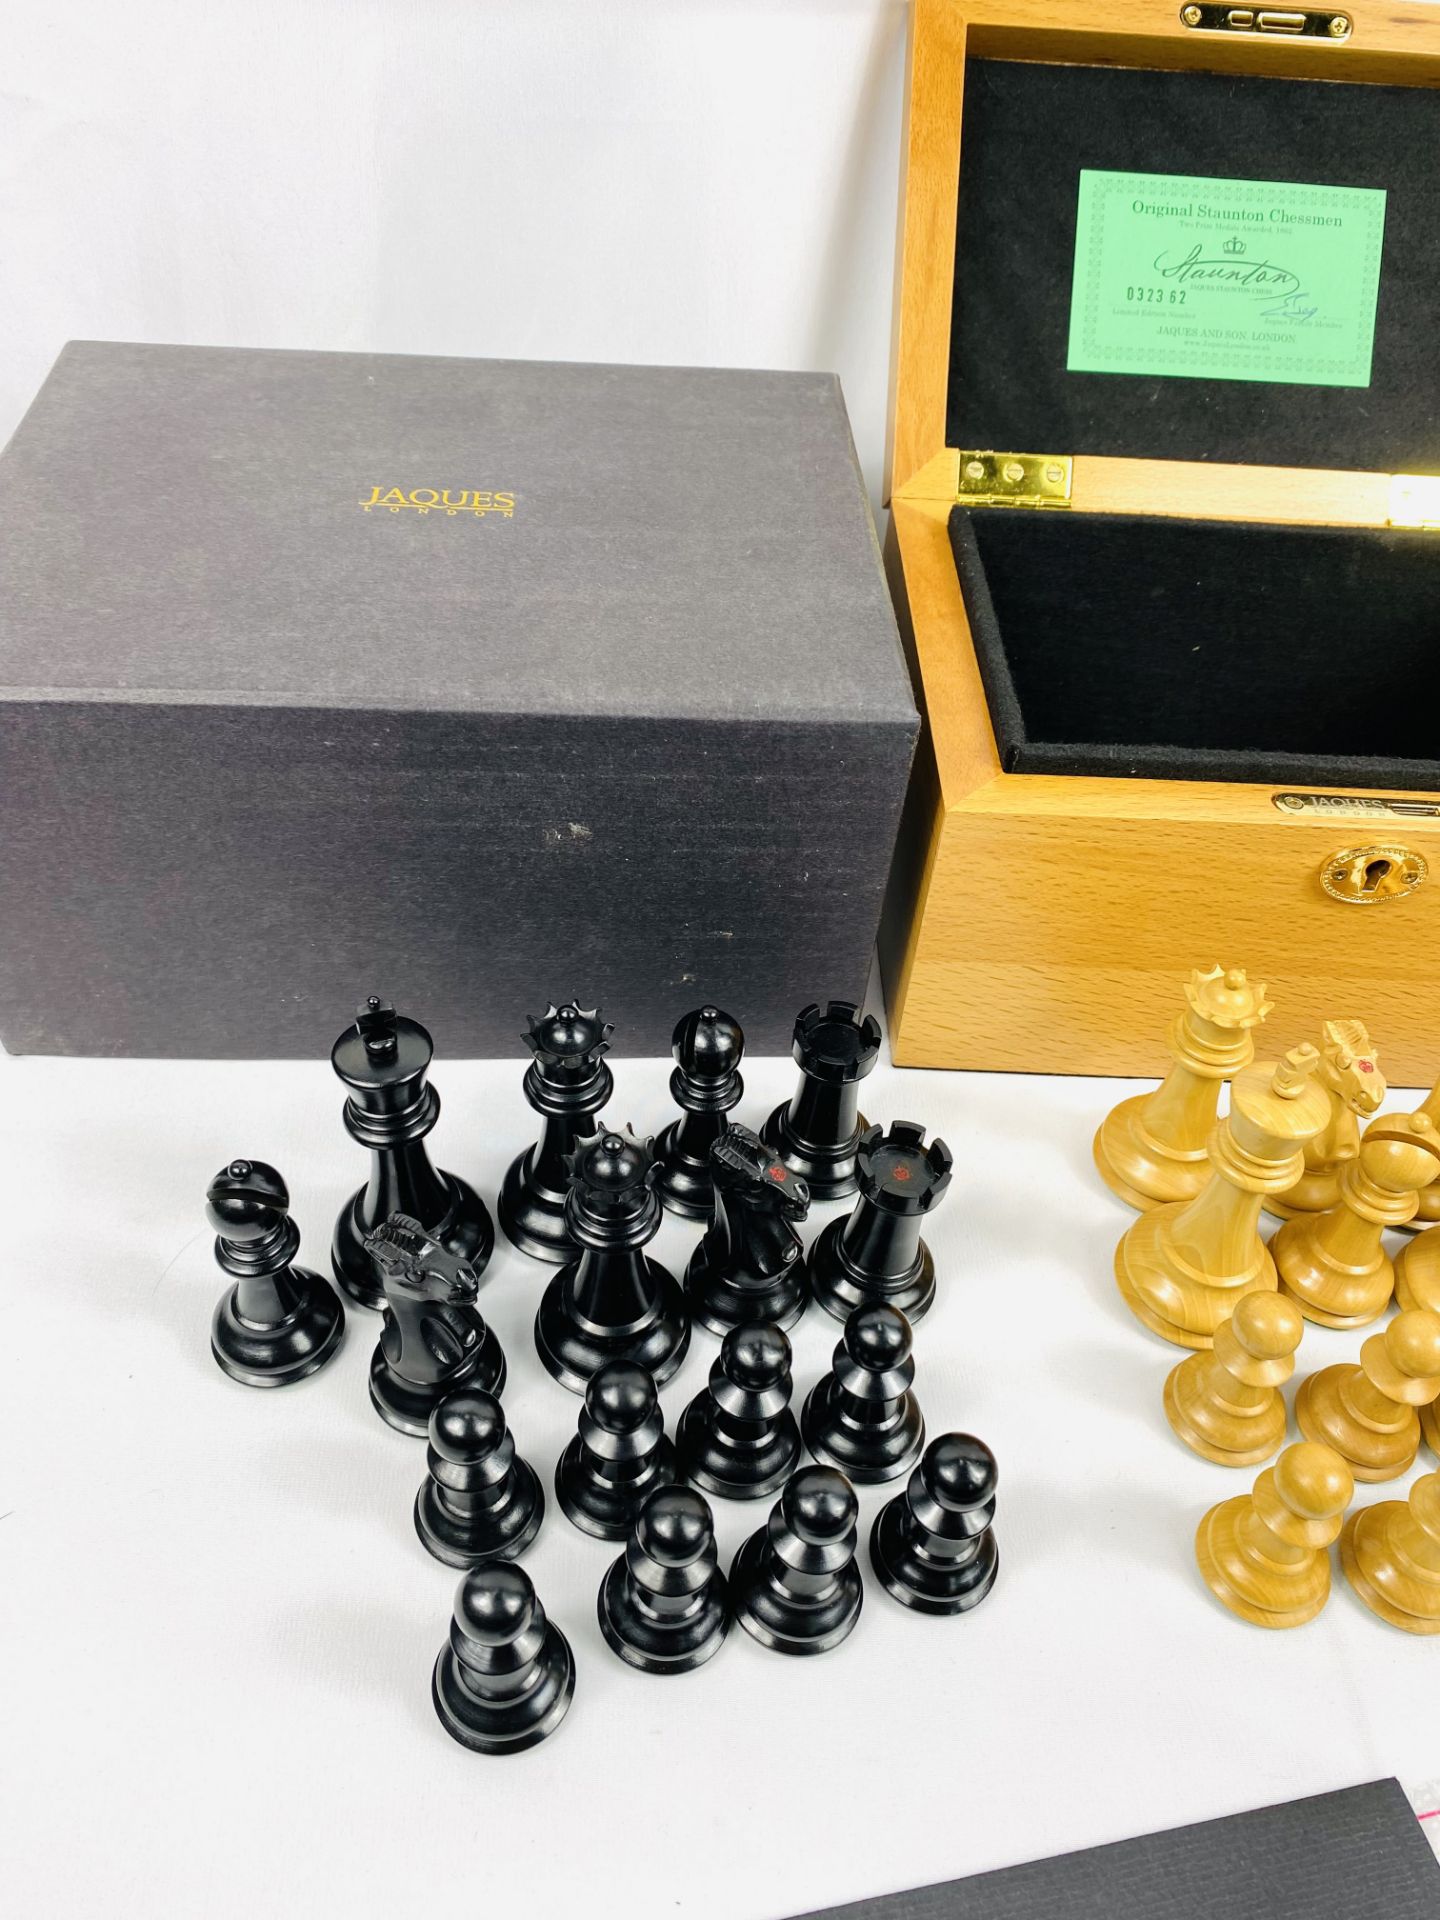 Jaques of London Staunton style chess set - Image 4 of 5